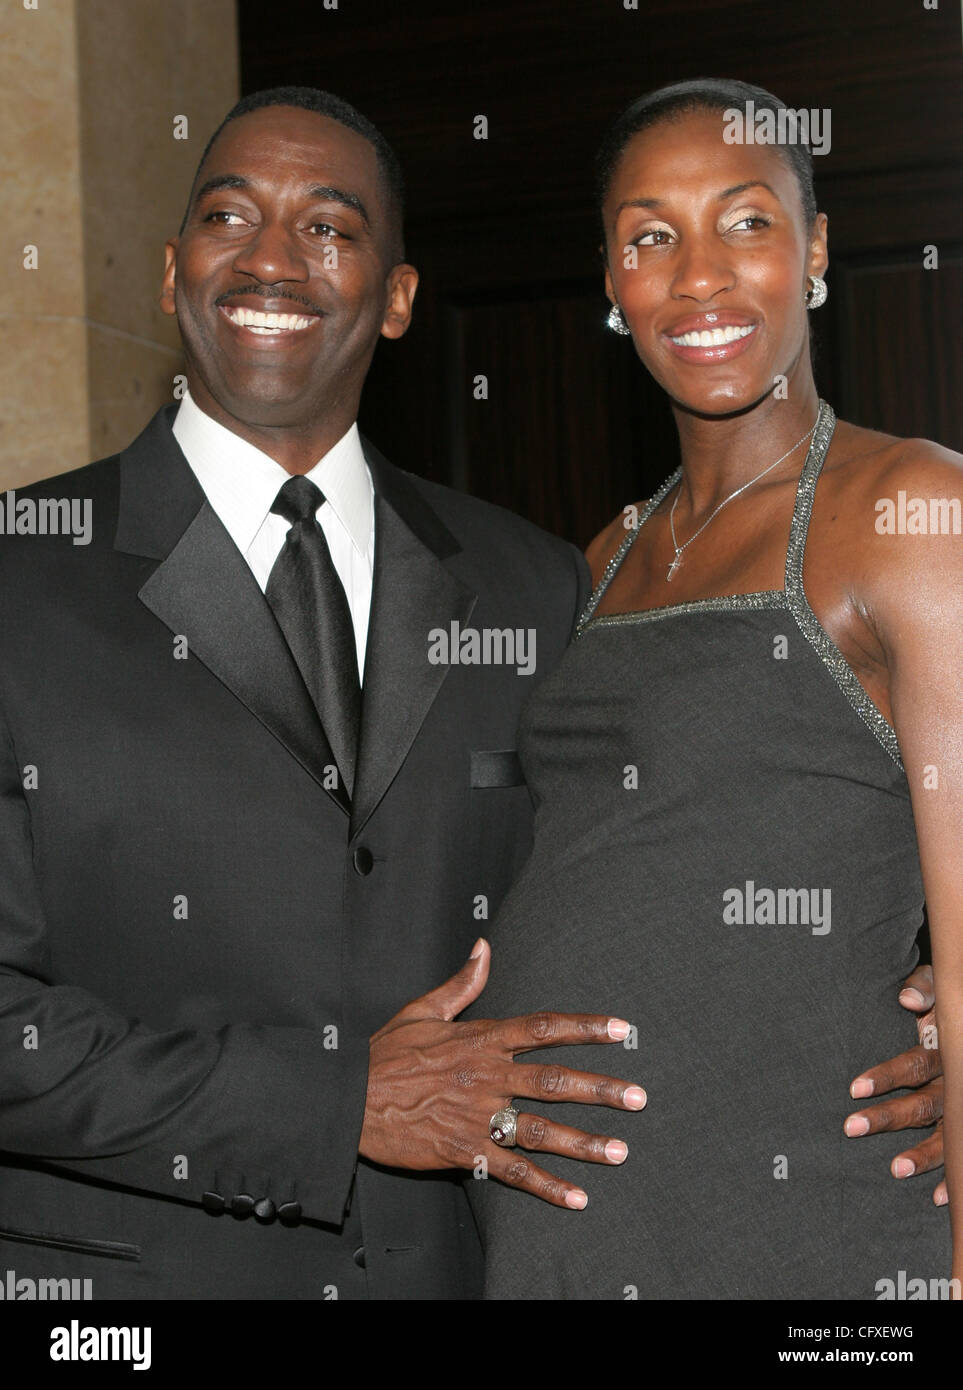 Apr 11, 2007 - Beverly Hills, CA, USA - Basketball Player LISA LESLIE and MICHAEL  LOCKWOOD arrive at The Billie Awards presented by the Women's Sports  Foundation at the Beverly Hilton Hotel. (